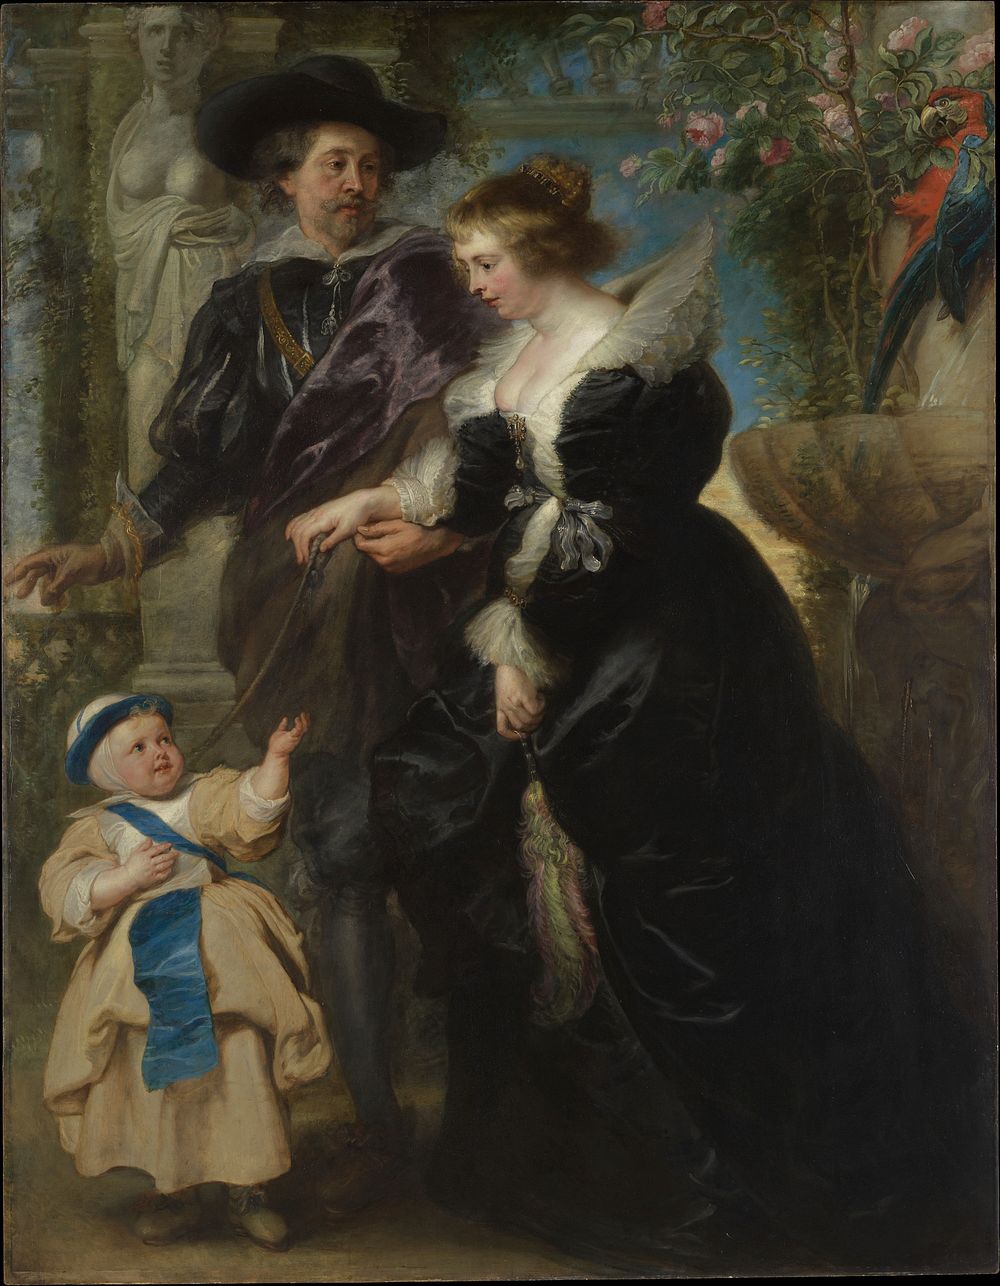 Rubens, Helena Fourment (1614–1673), and Their Son Frans (1633–1678) by Peter Paul Rubens